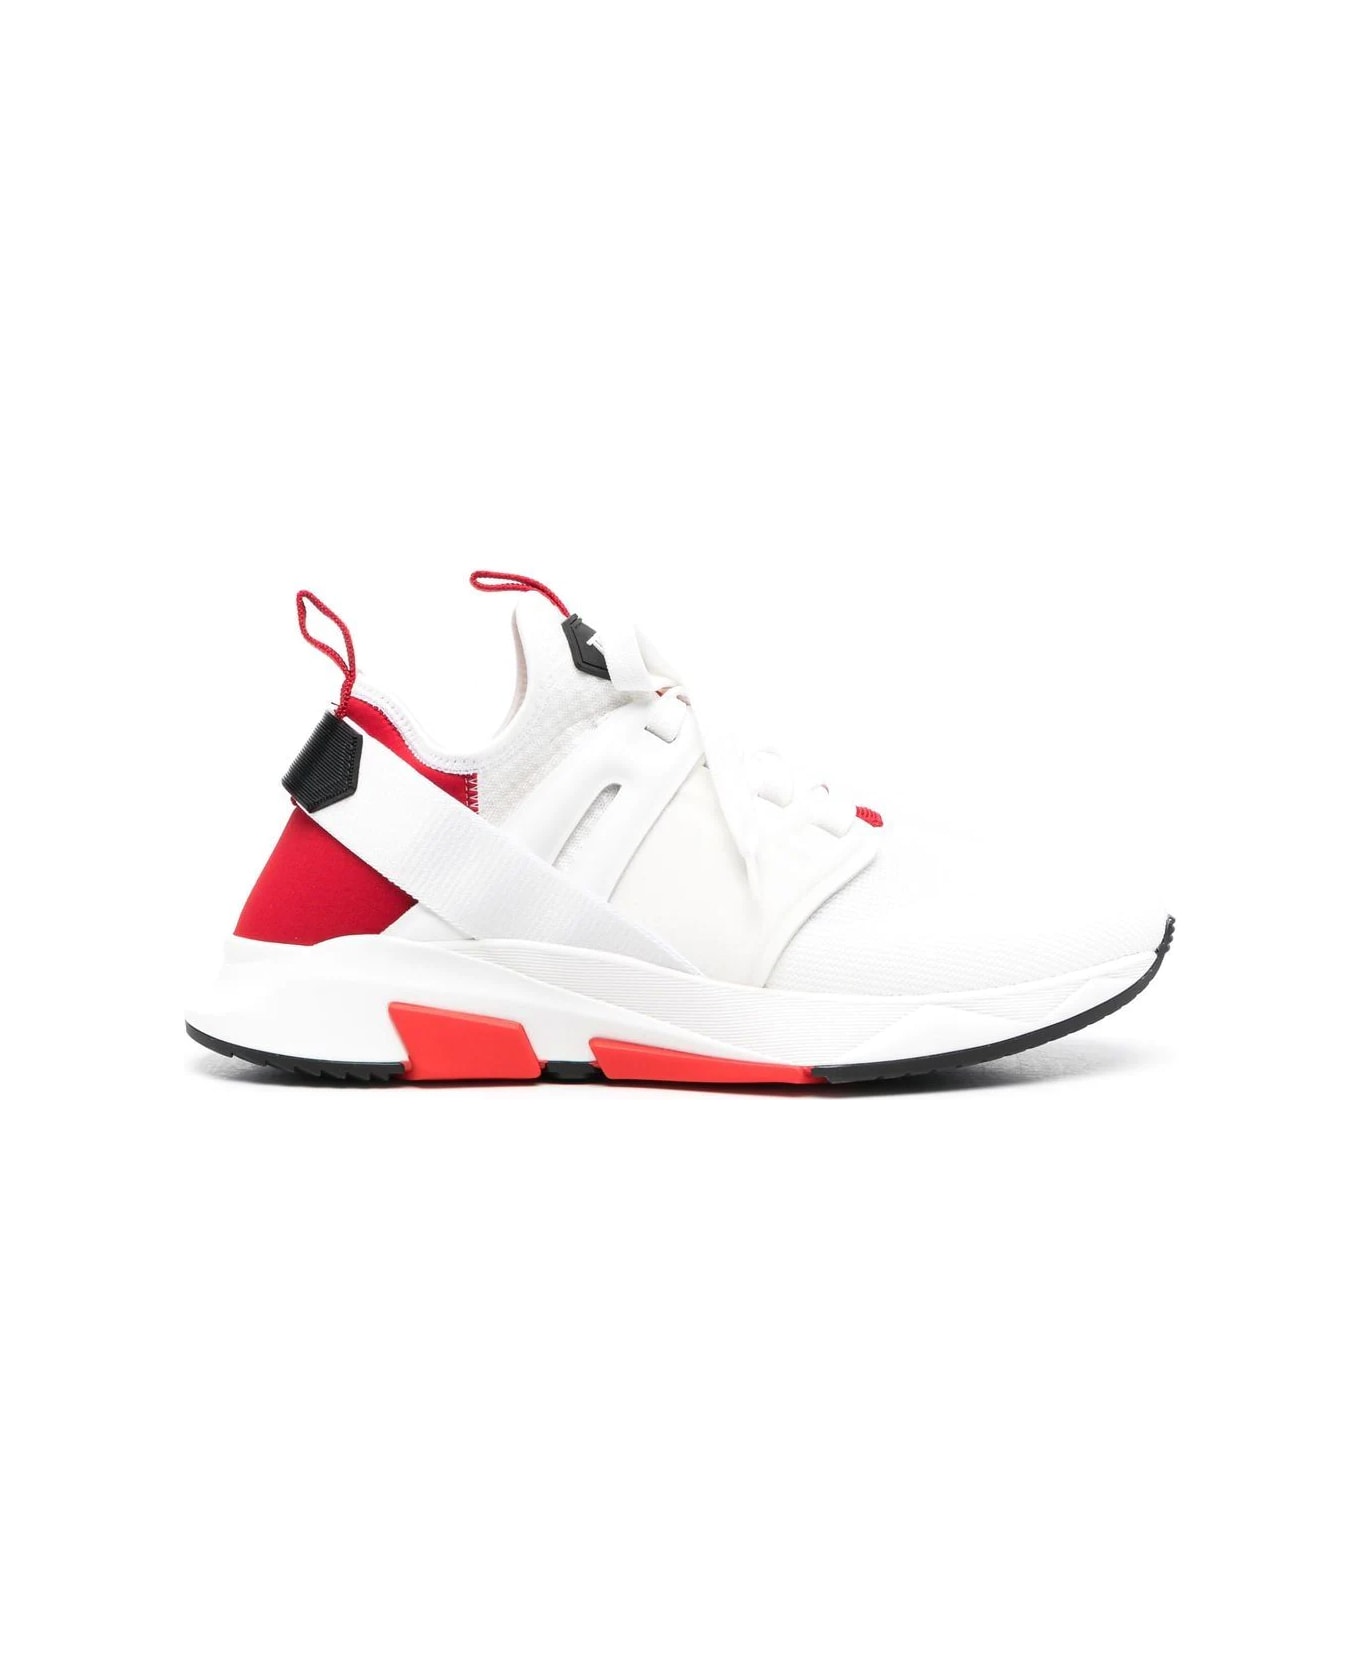 Tom Ford Low Top Sneakers - White Red White スニーカー